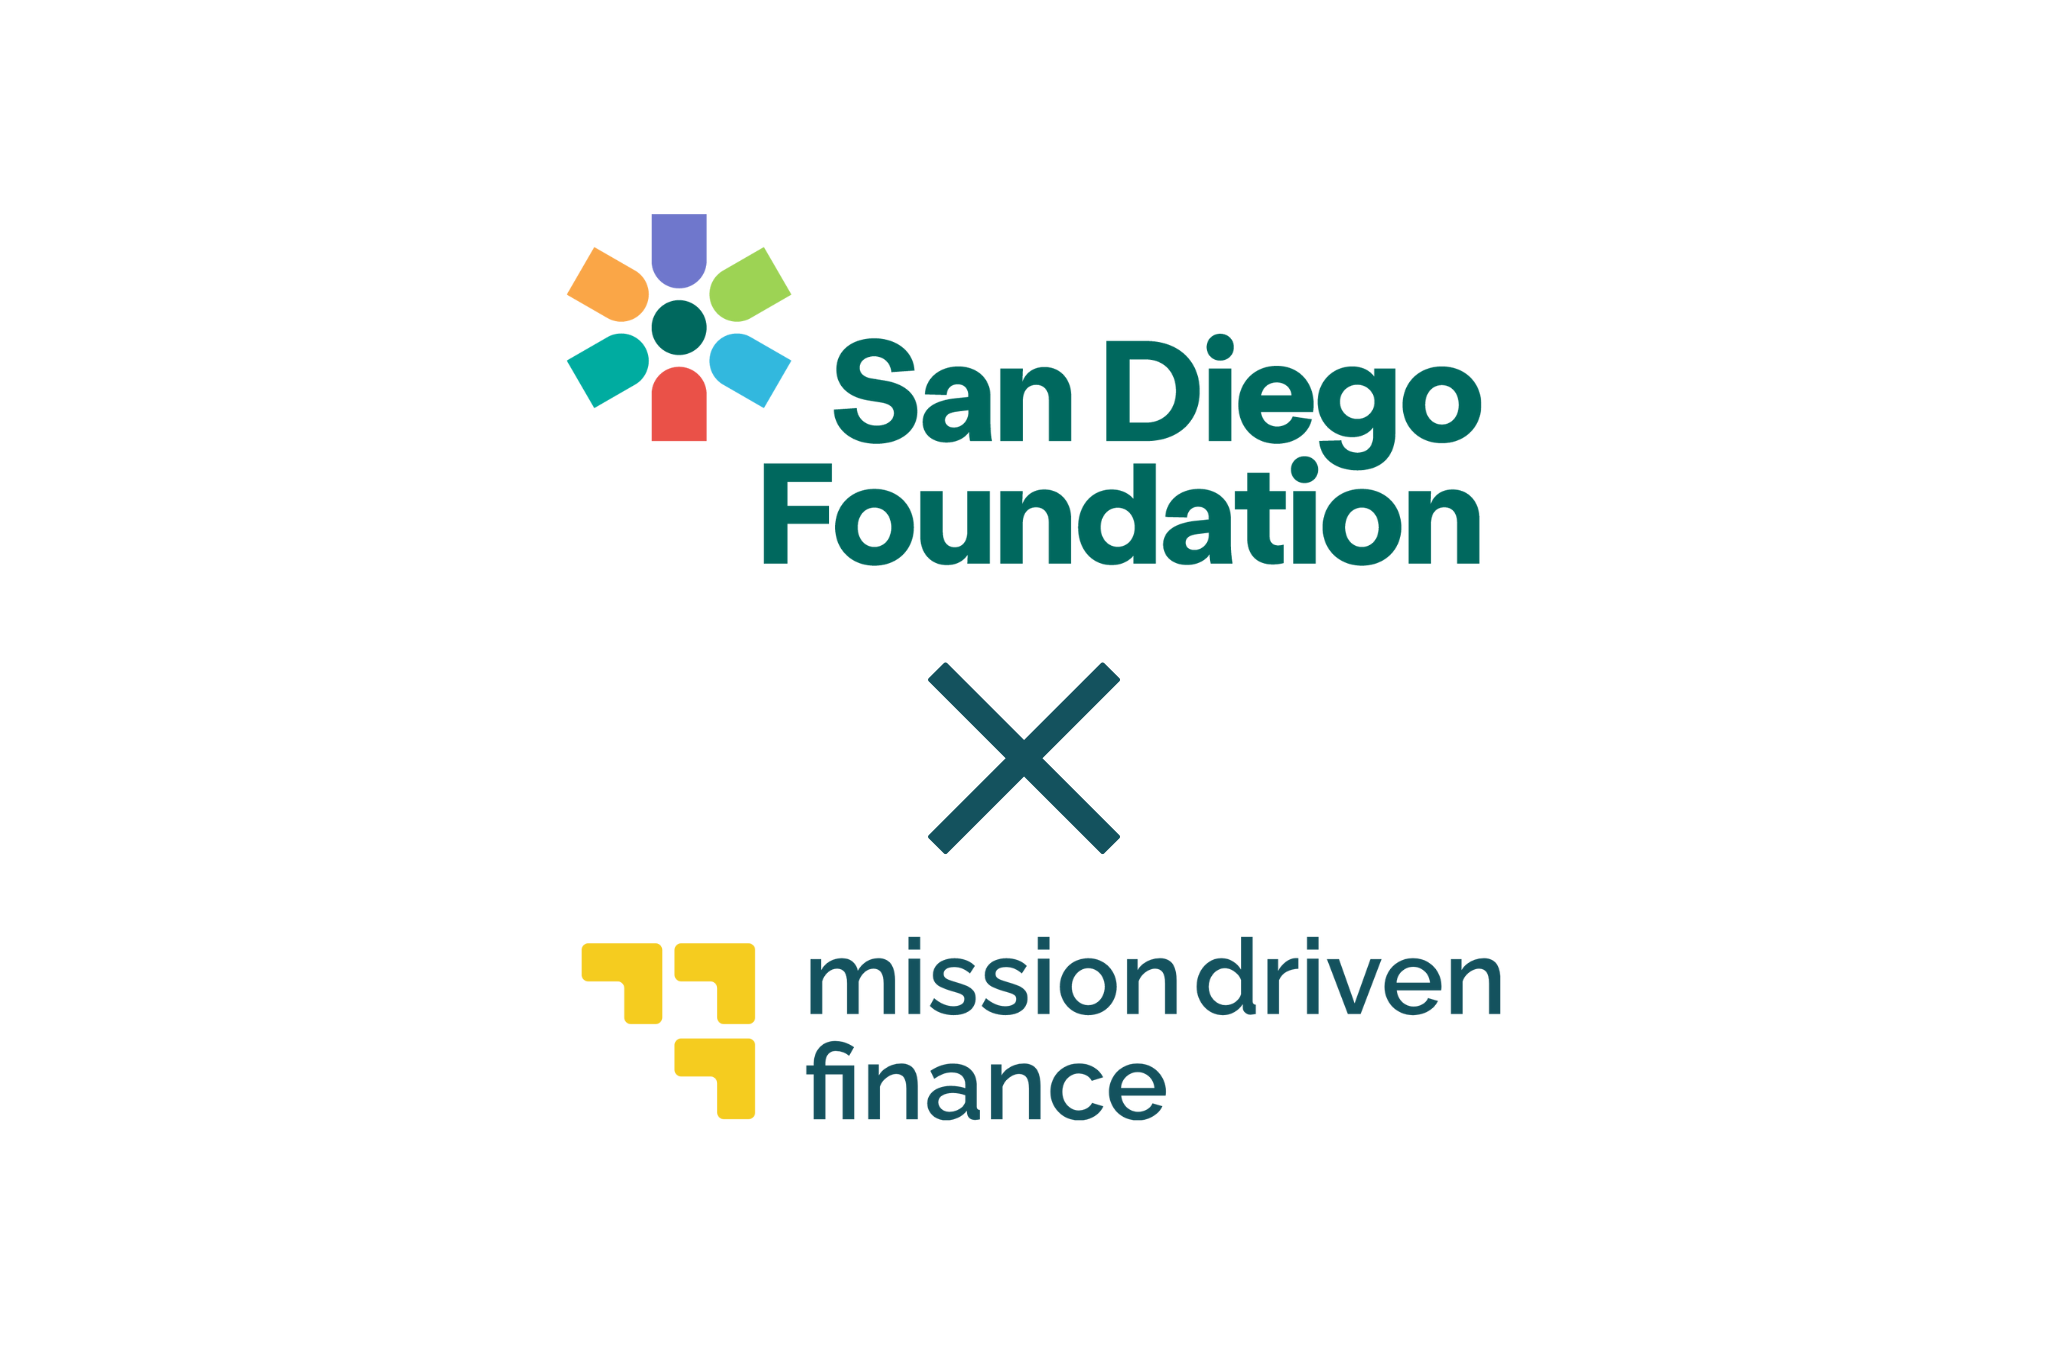 Logos of San Diego Foundation and Mission Driven Finance